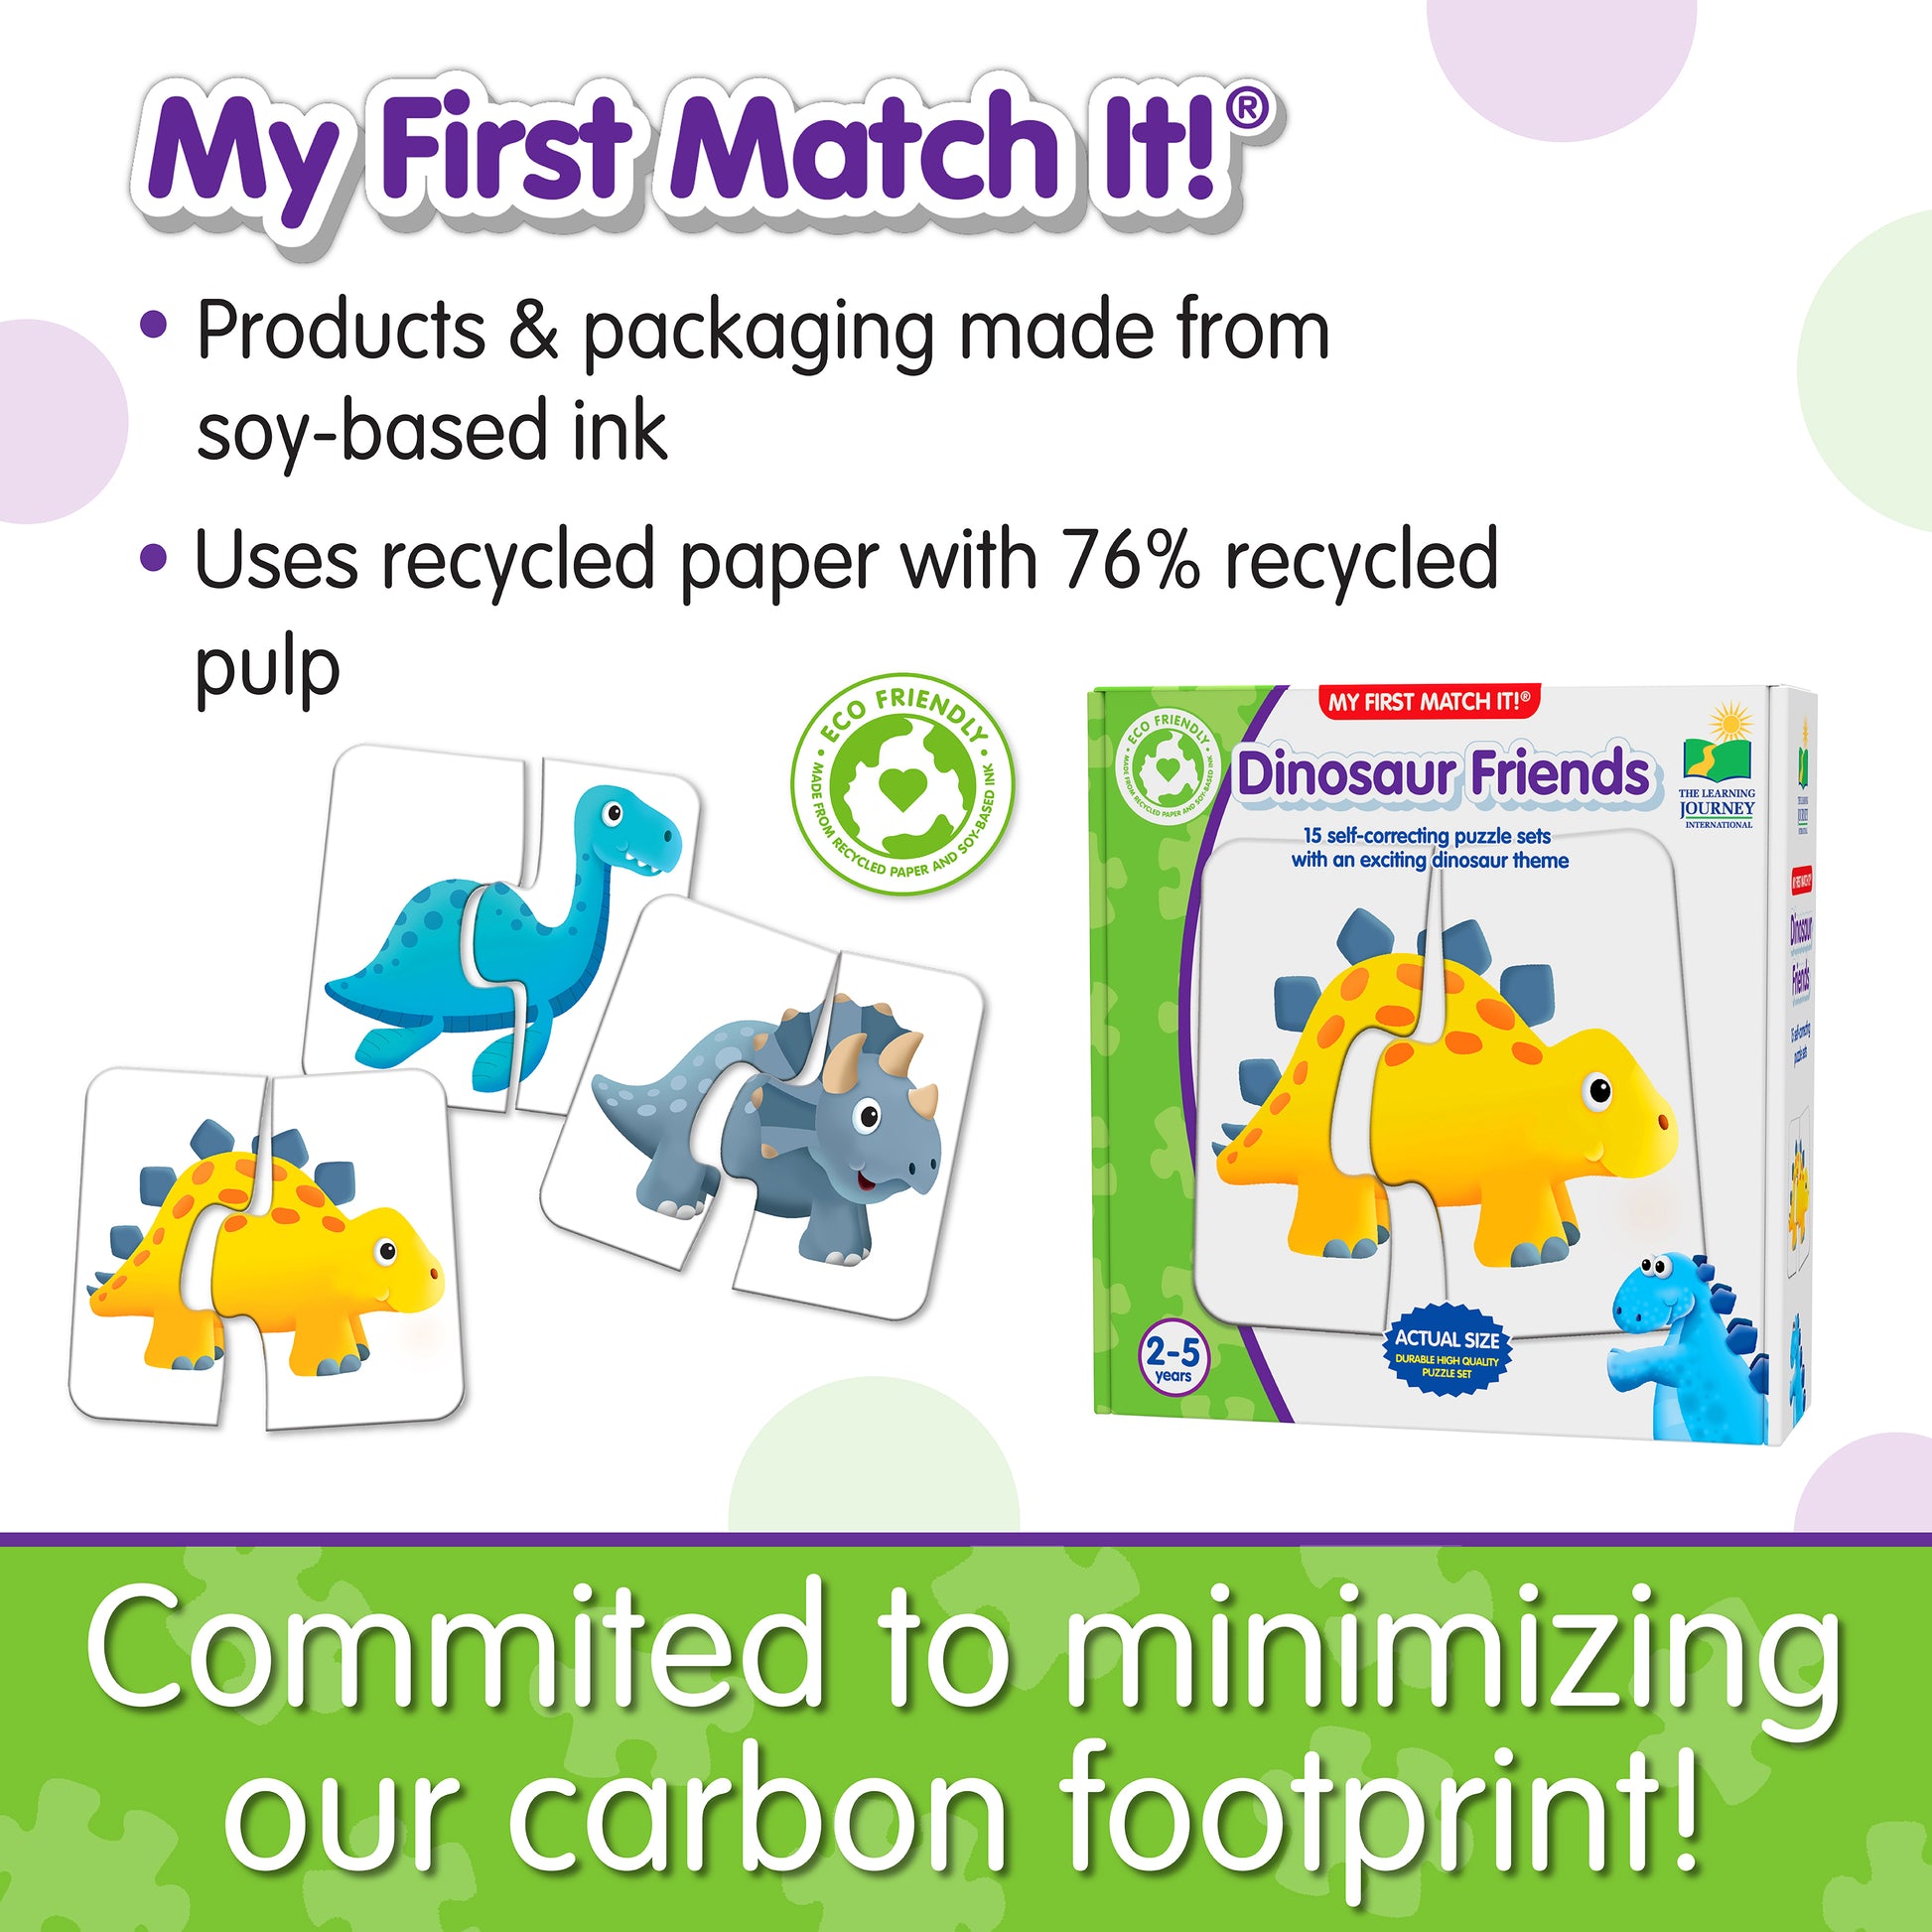 Infographic about My First Match It - Dinosaur Friends' features that says, "Committed to minimizing our carbon footprint!"